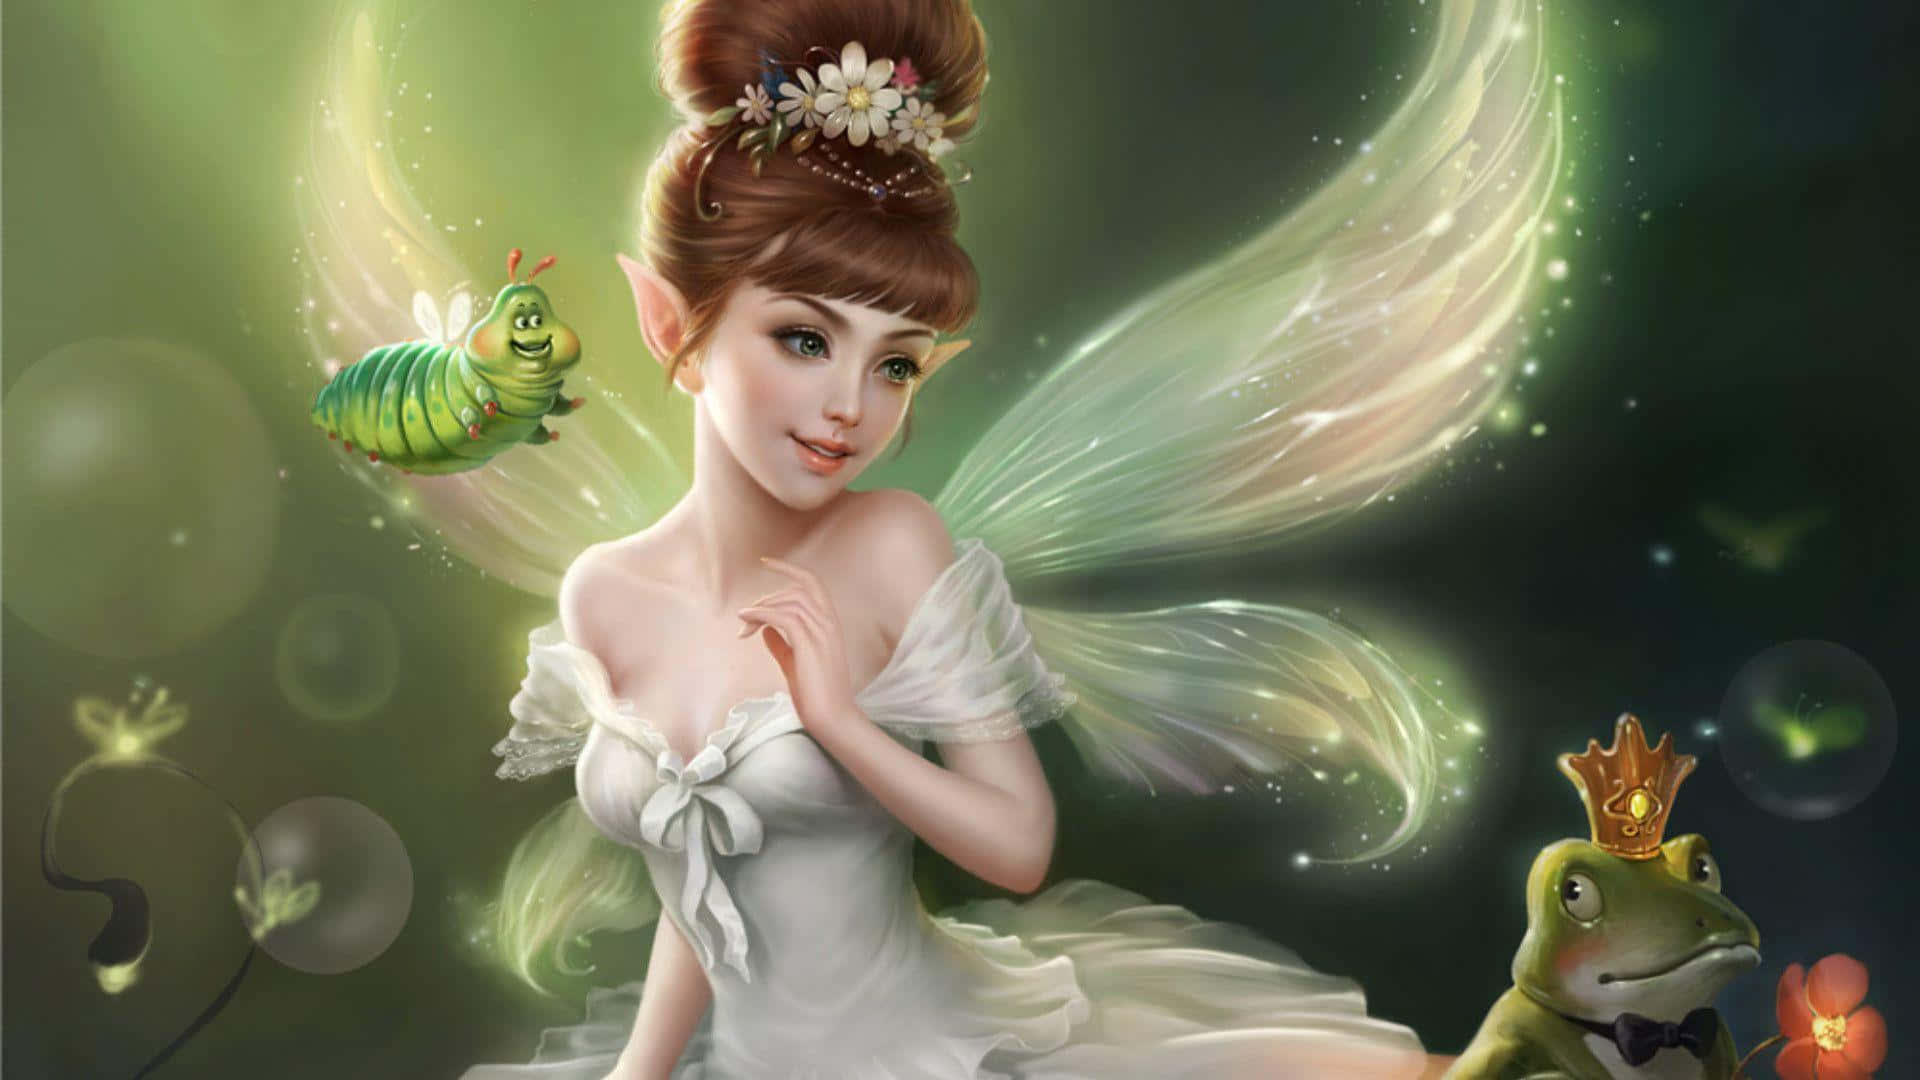 Caption: Enchanting Cute Fairy in a Magical Forest Wallpaper